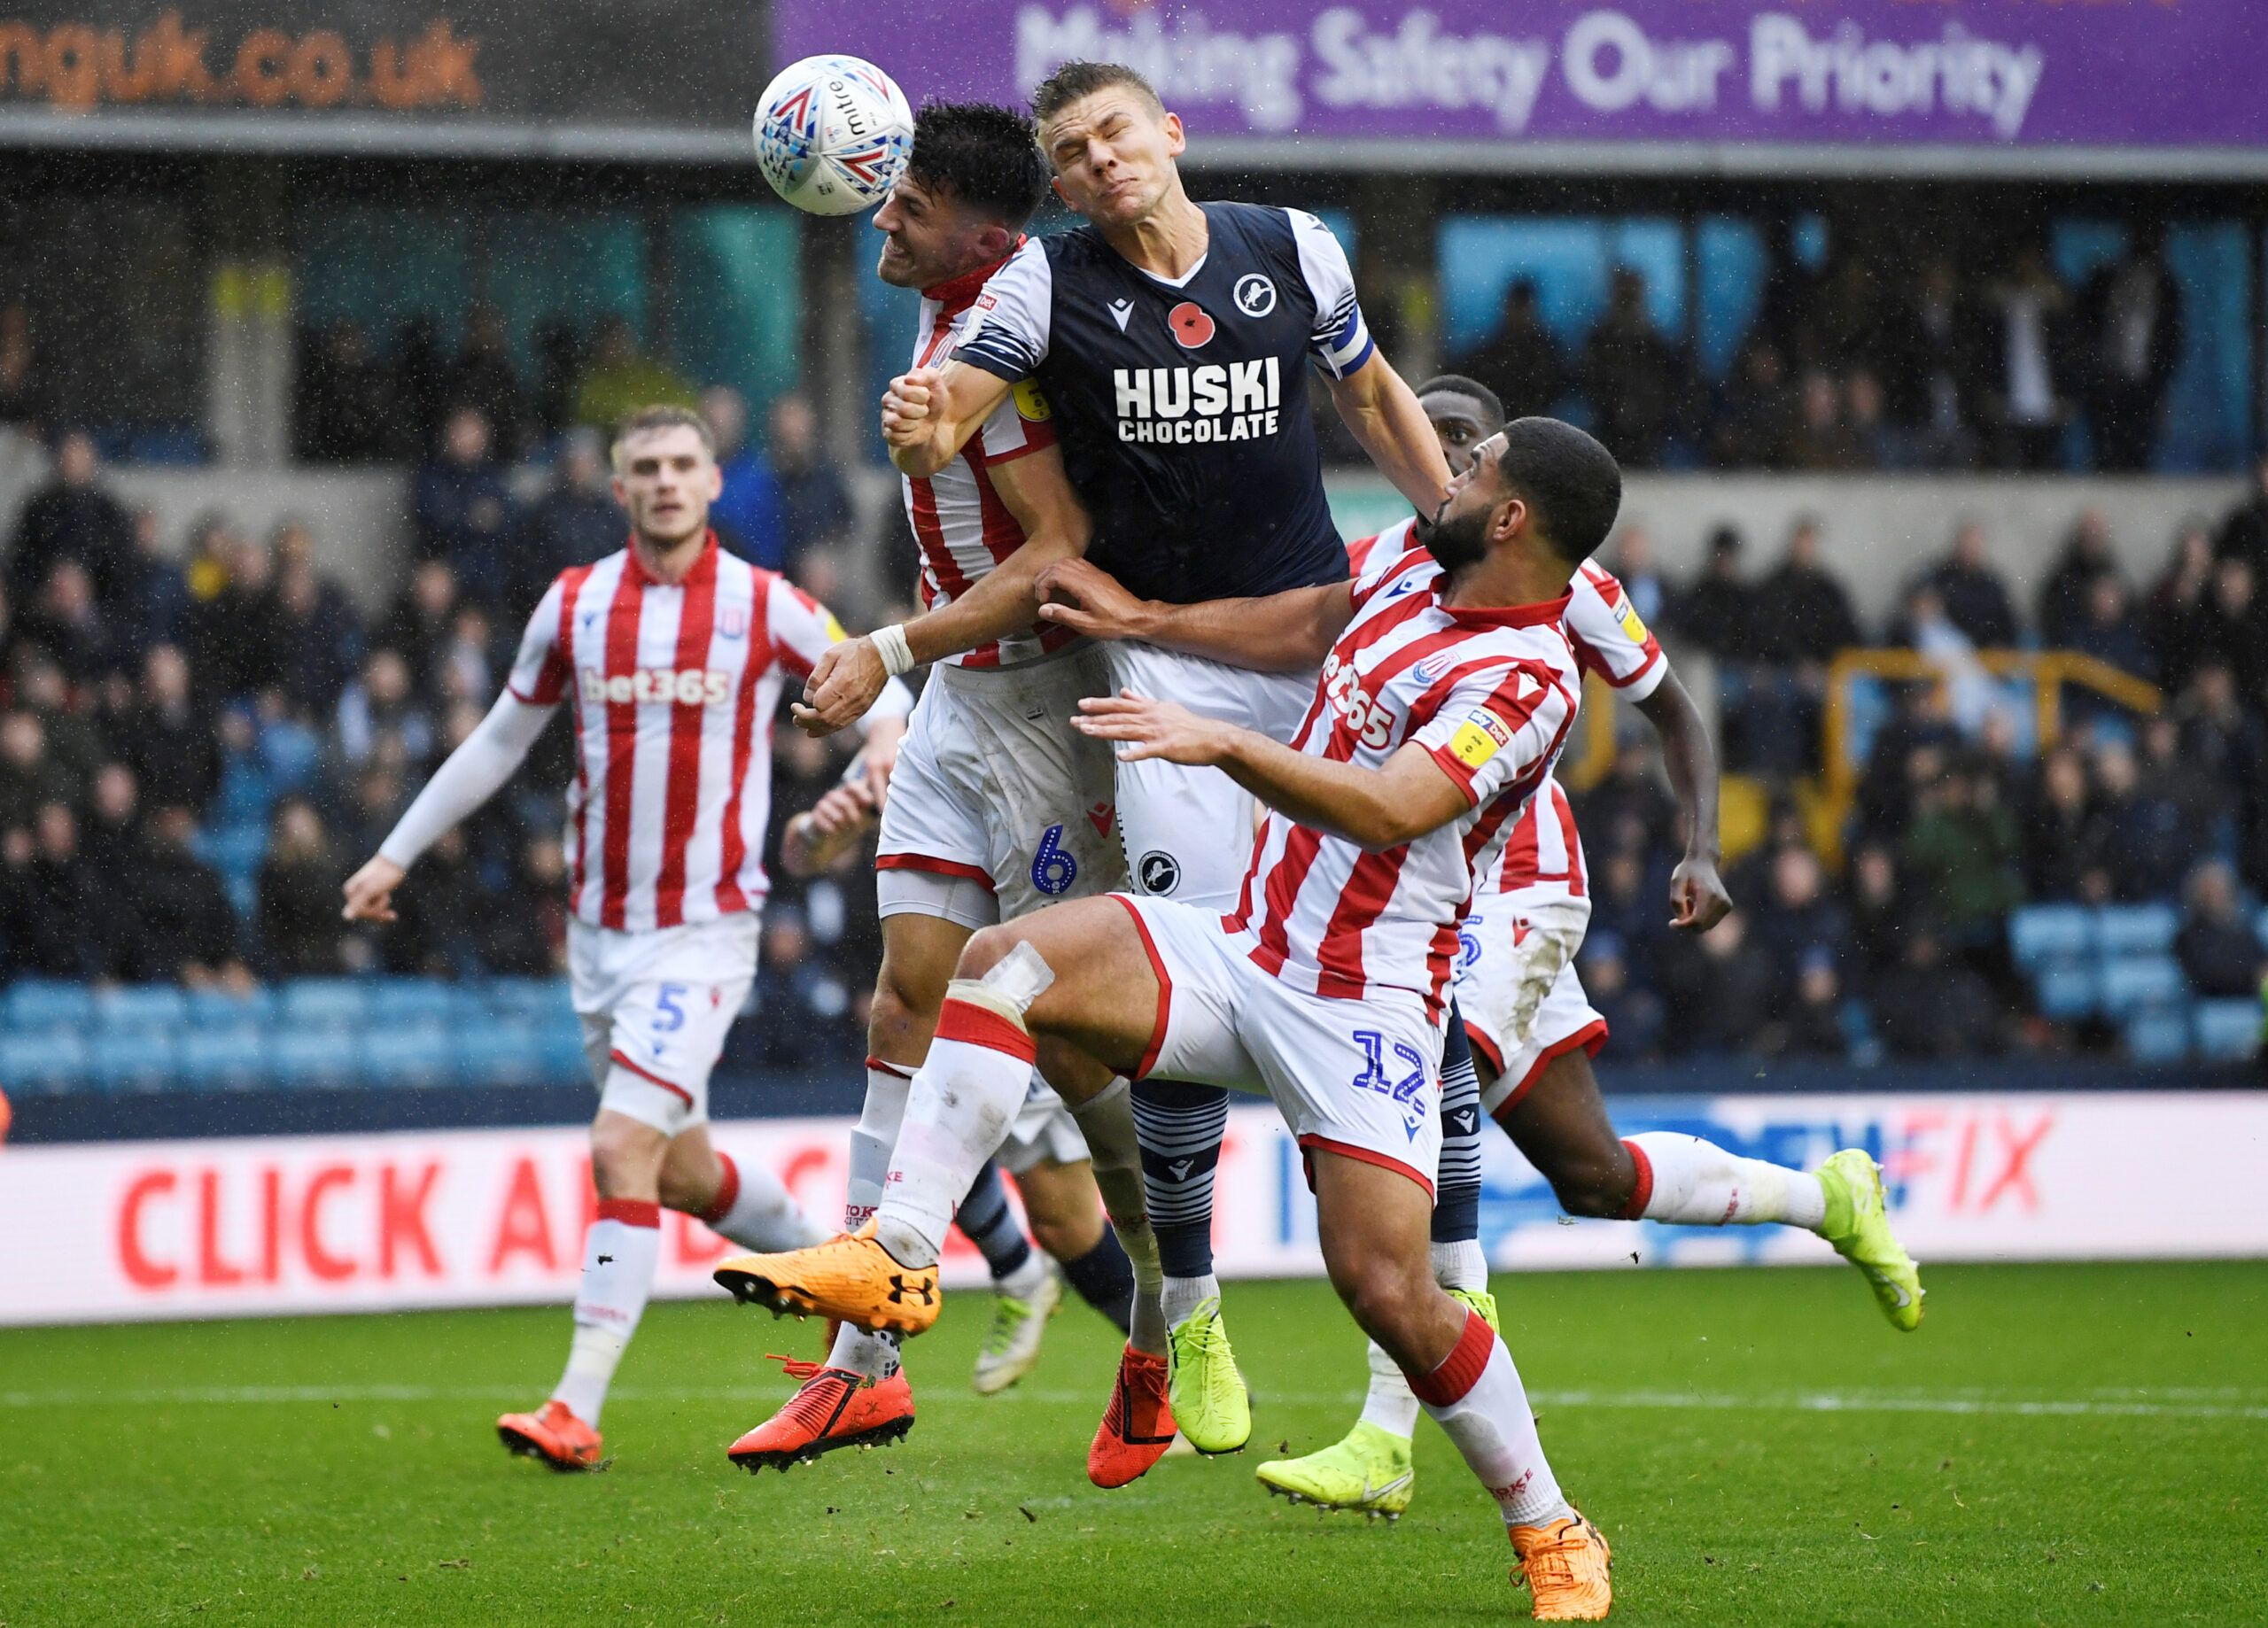 Soccer Football - Championship - Millwall v Stoke City - The Den, London, Britain - October 26, 2019  Millwall's Shaun Hutchunson in action with Stoke City’s Danny Batth  Action Images/Tony O'Brien  EDITORIAL USE ONLY. No use with unauthorized audio, video, data, fixture lists, club/league logos or 